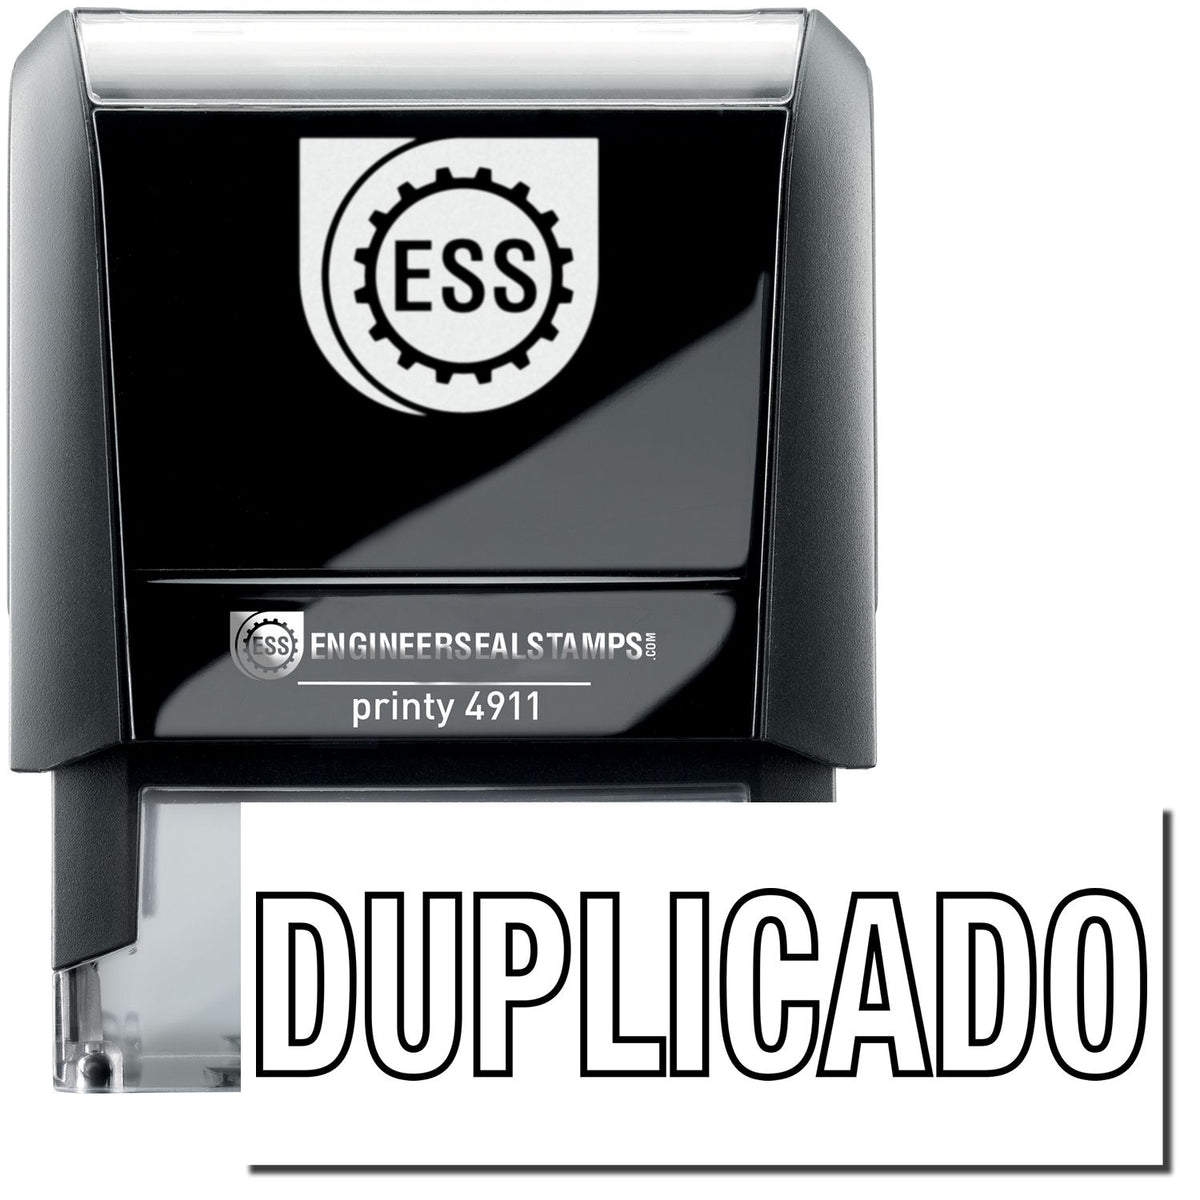 A self-inking stamp with a stamped image showing how the text &quot;DUPLICADO&quot; in an outline style is displayed after stamping.